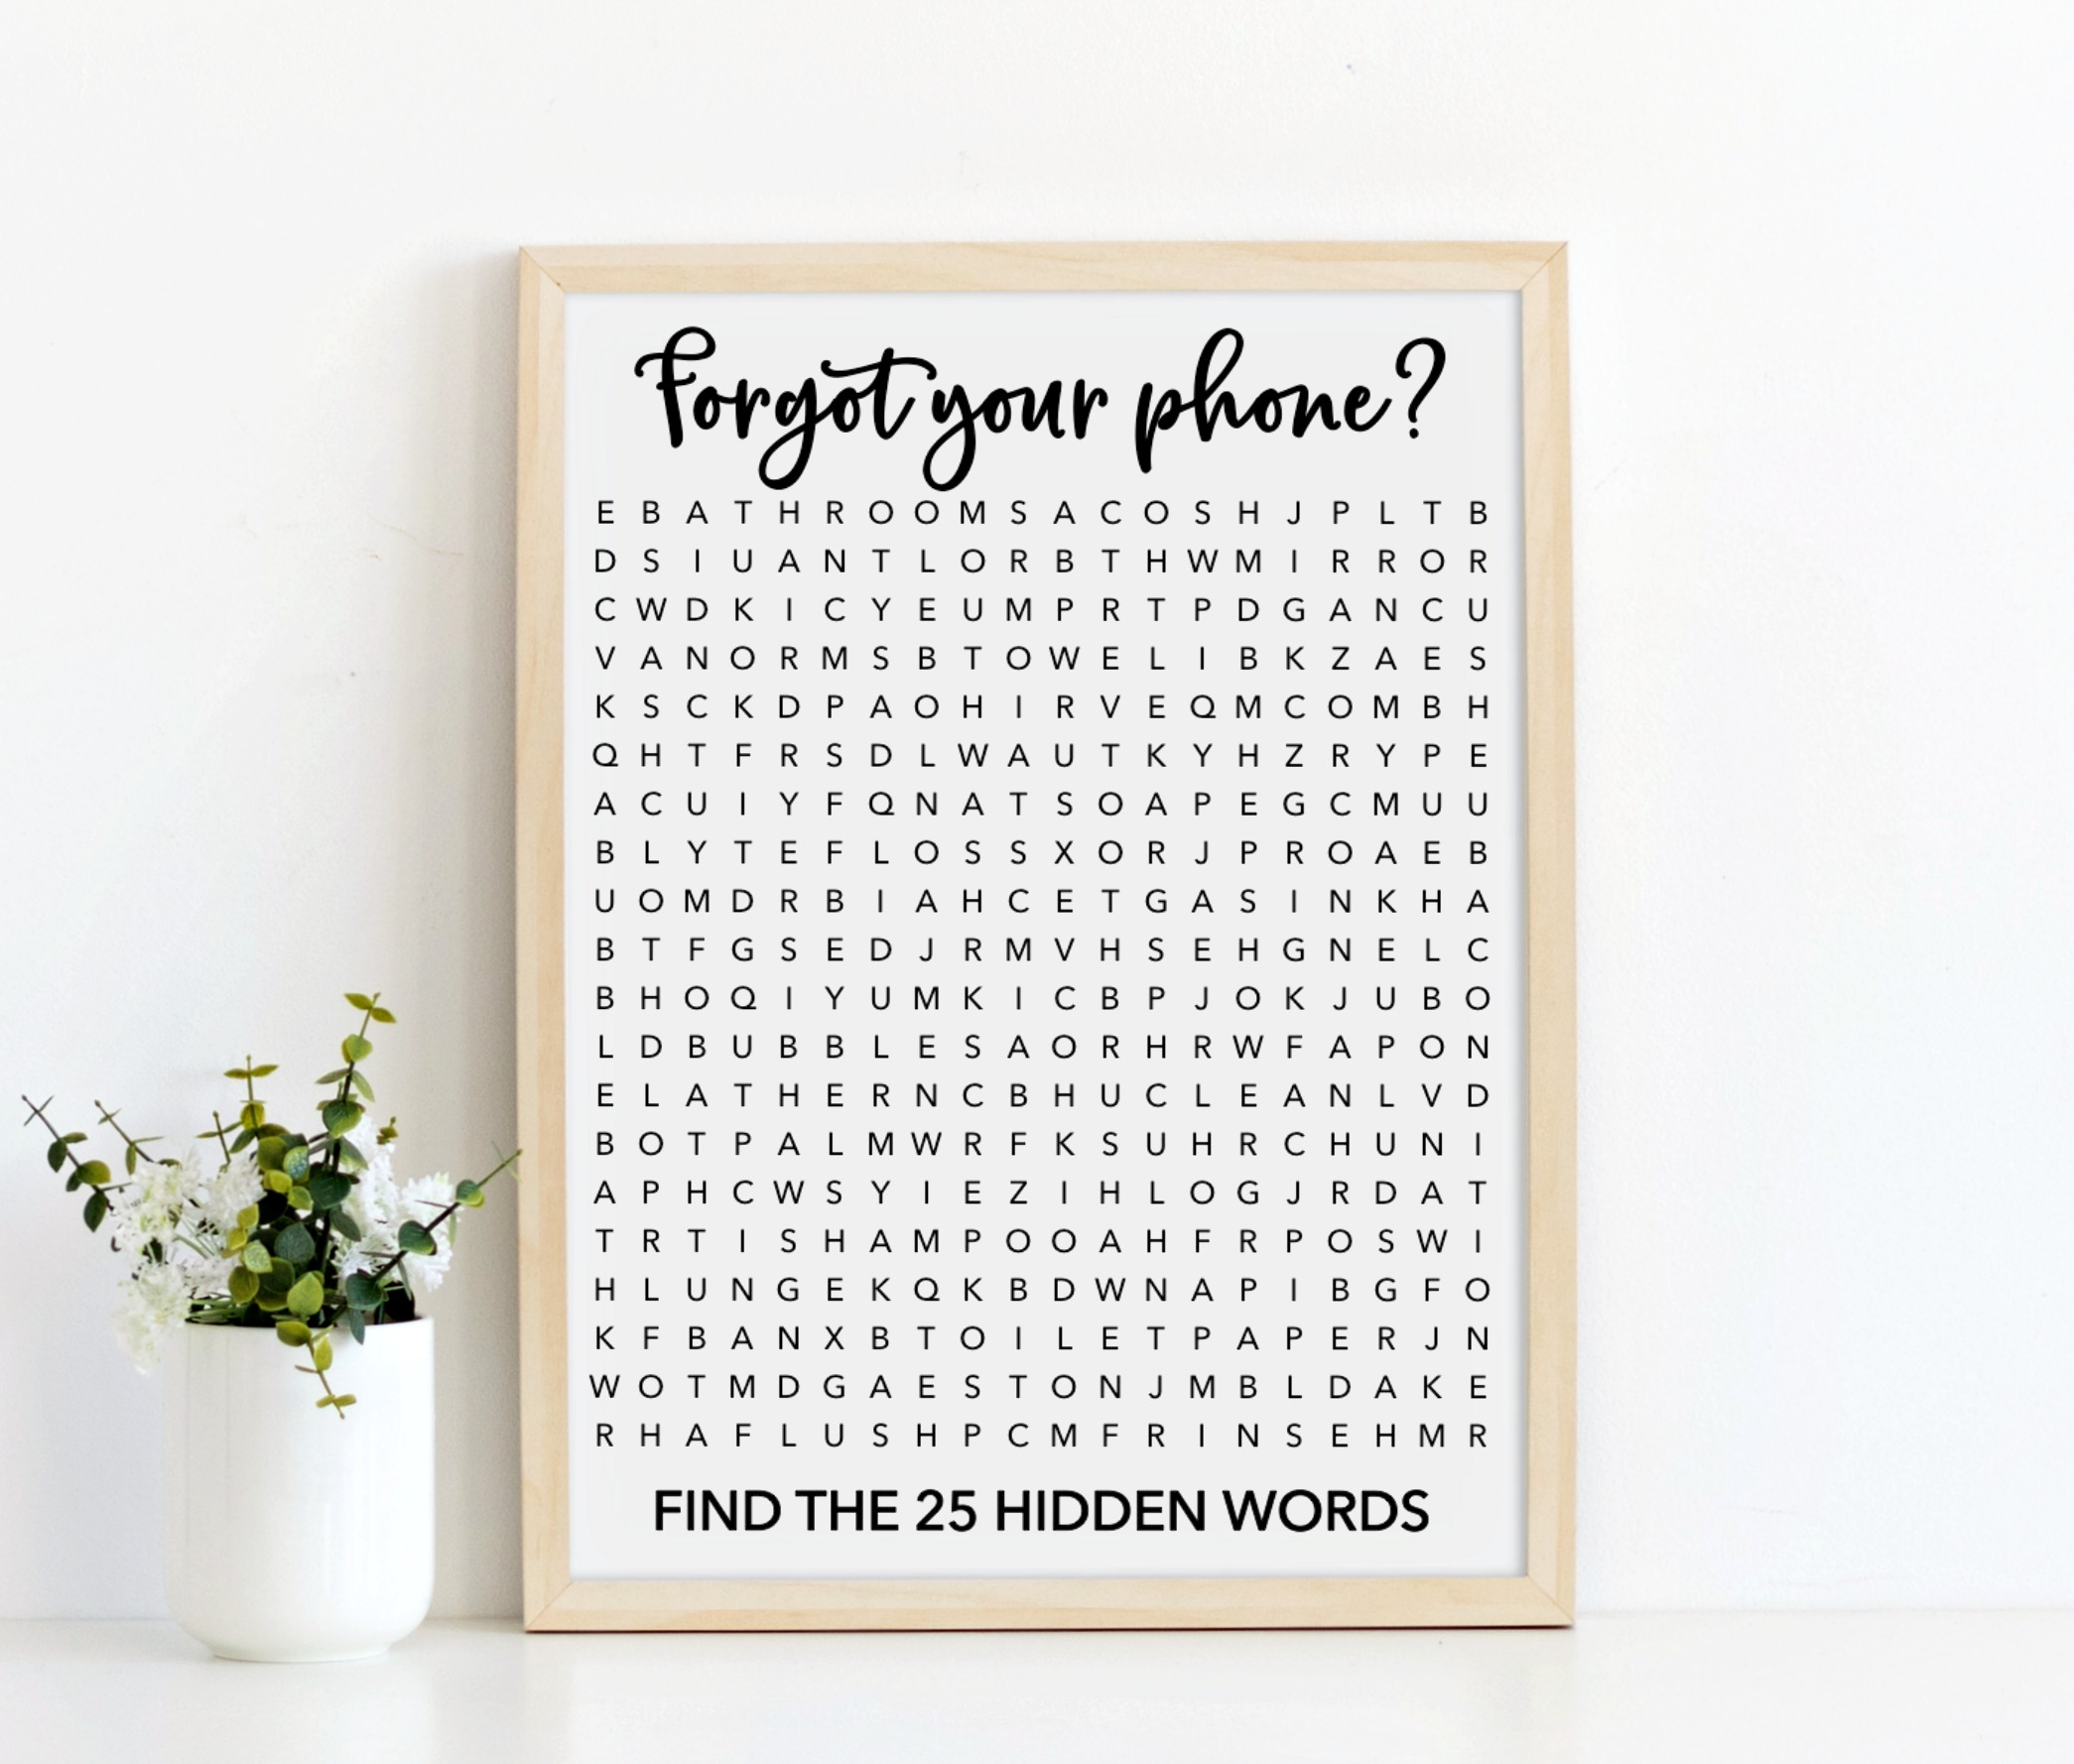 Bathroom Word Search And Maze Puzzles - Free Printables